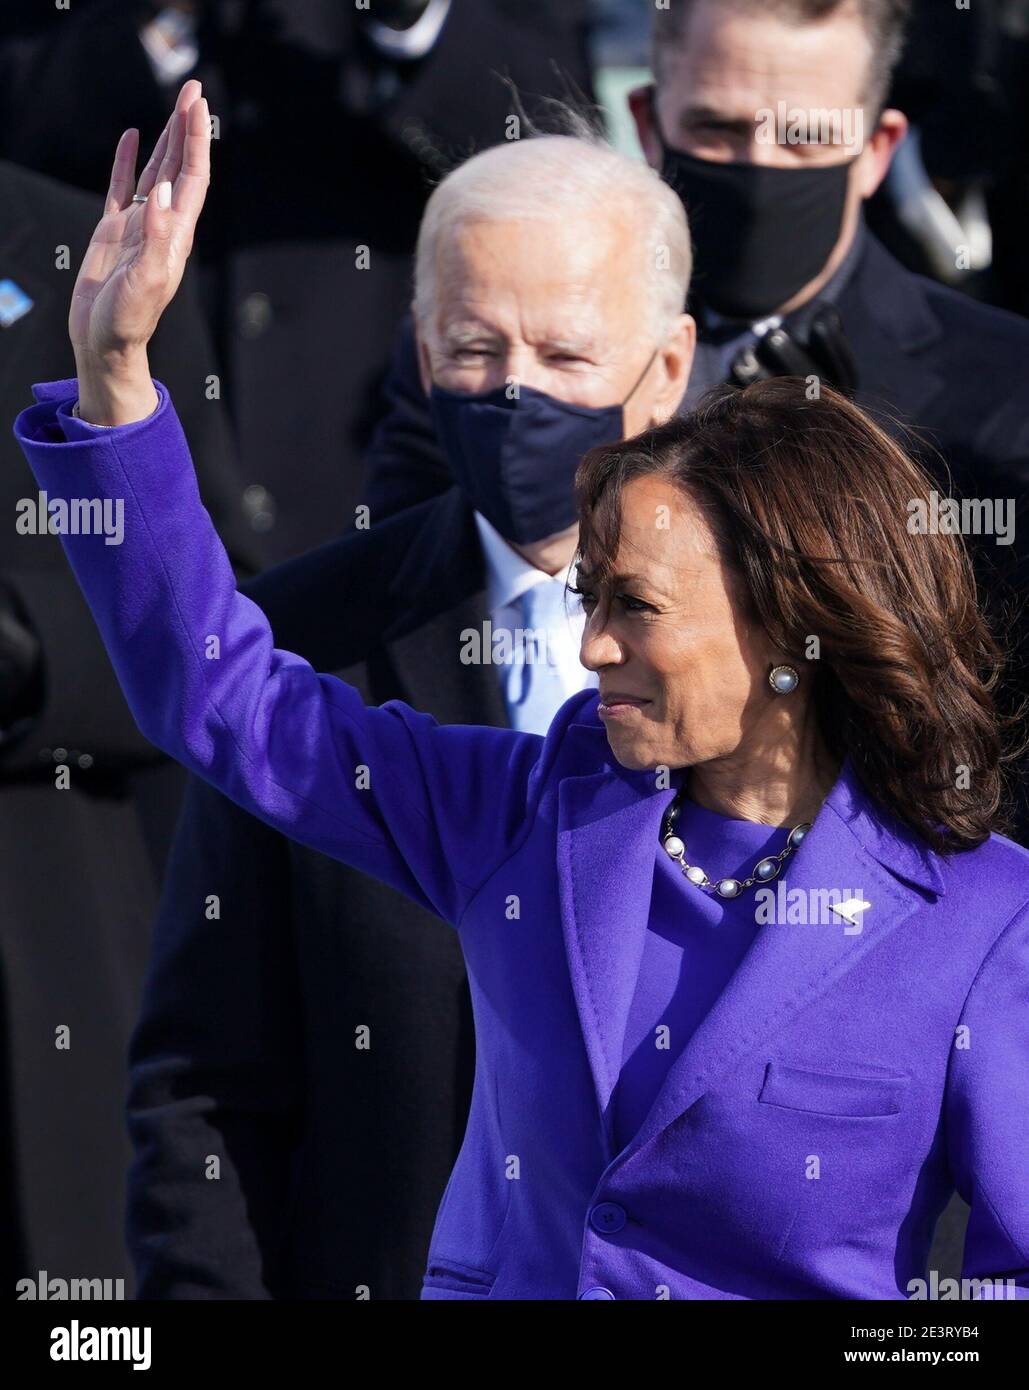 U.S. Vice President Kamala Harris waves during the inauguration of Joe Biden as the 46th President of the United States on the West Front of the U.S. Capitol in Washington, U.S., January 20, 2021. REUTERS/Kevin Lamarque Stock Photo